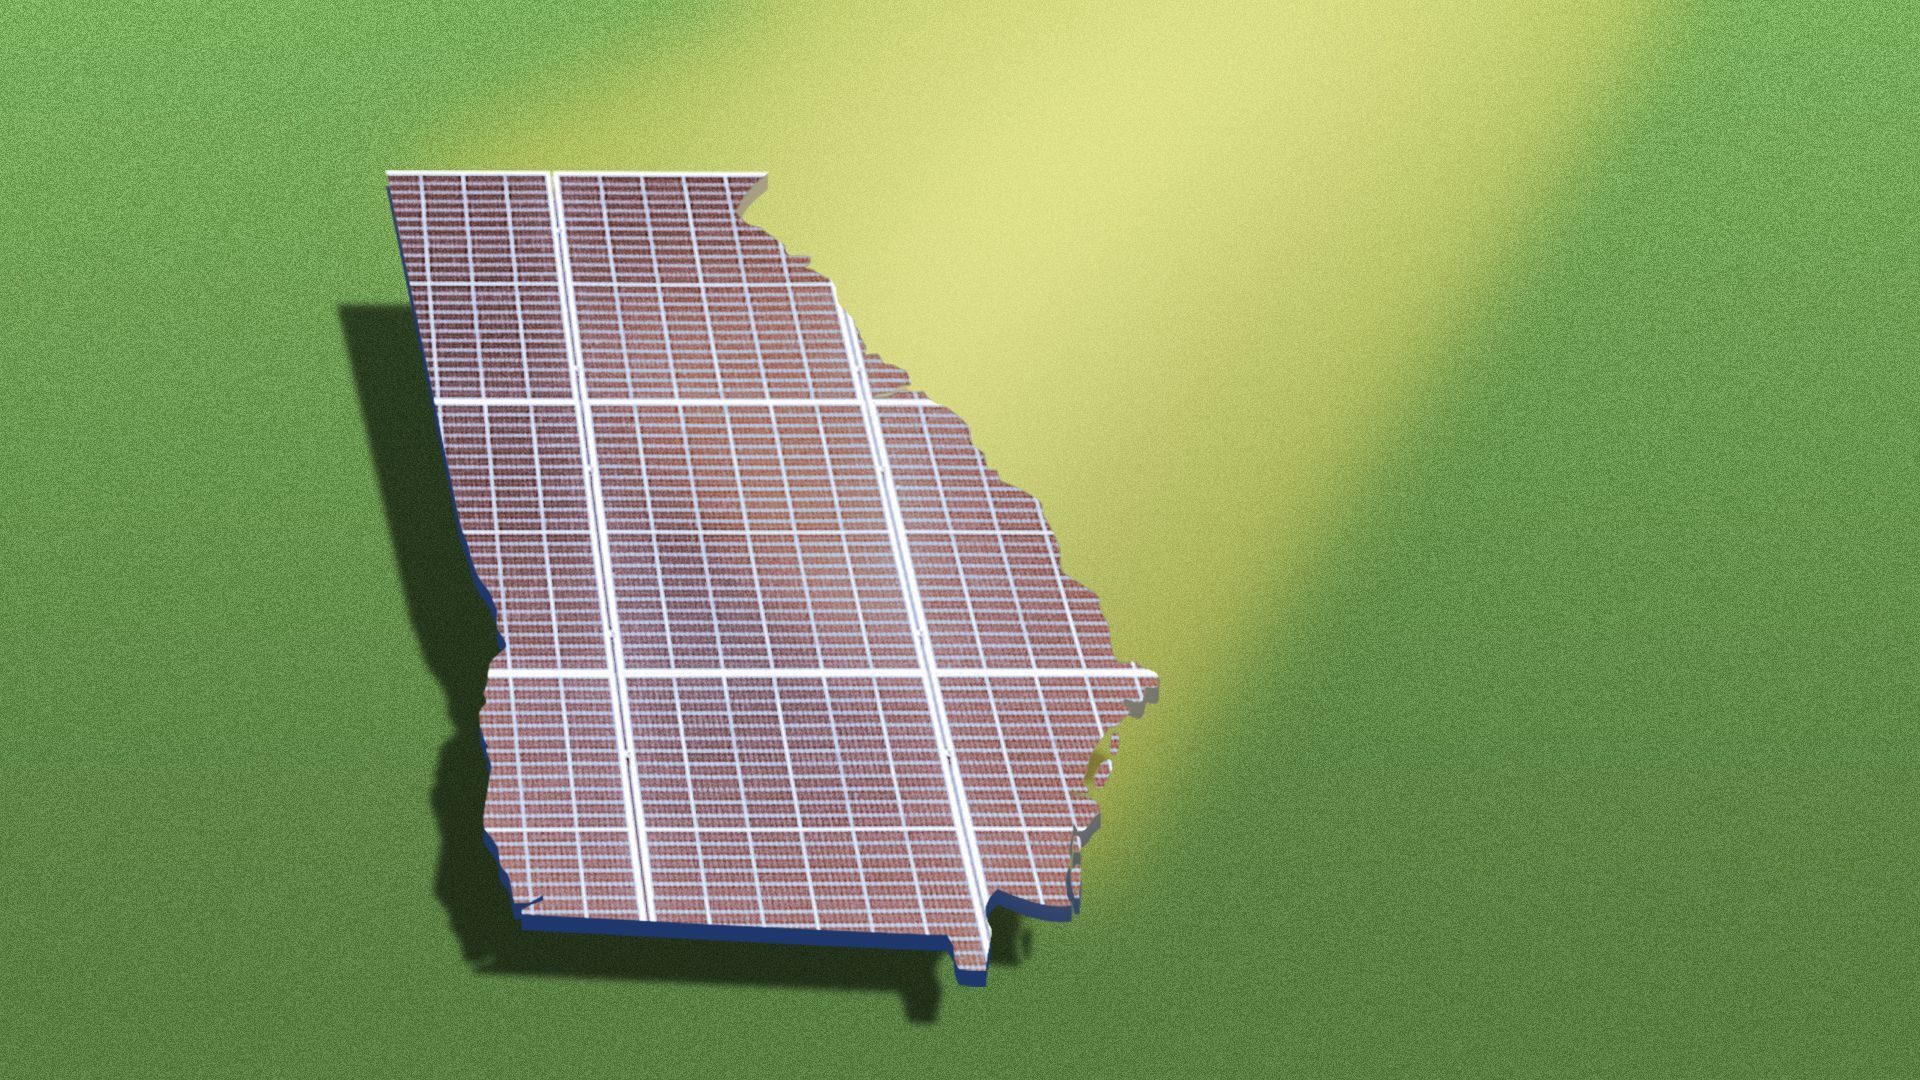 Illustration of a solar panel shaped like the state of Georgia.